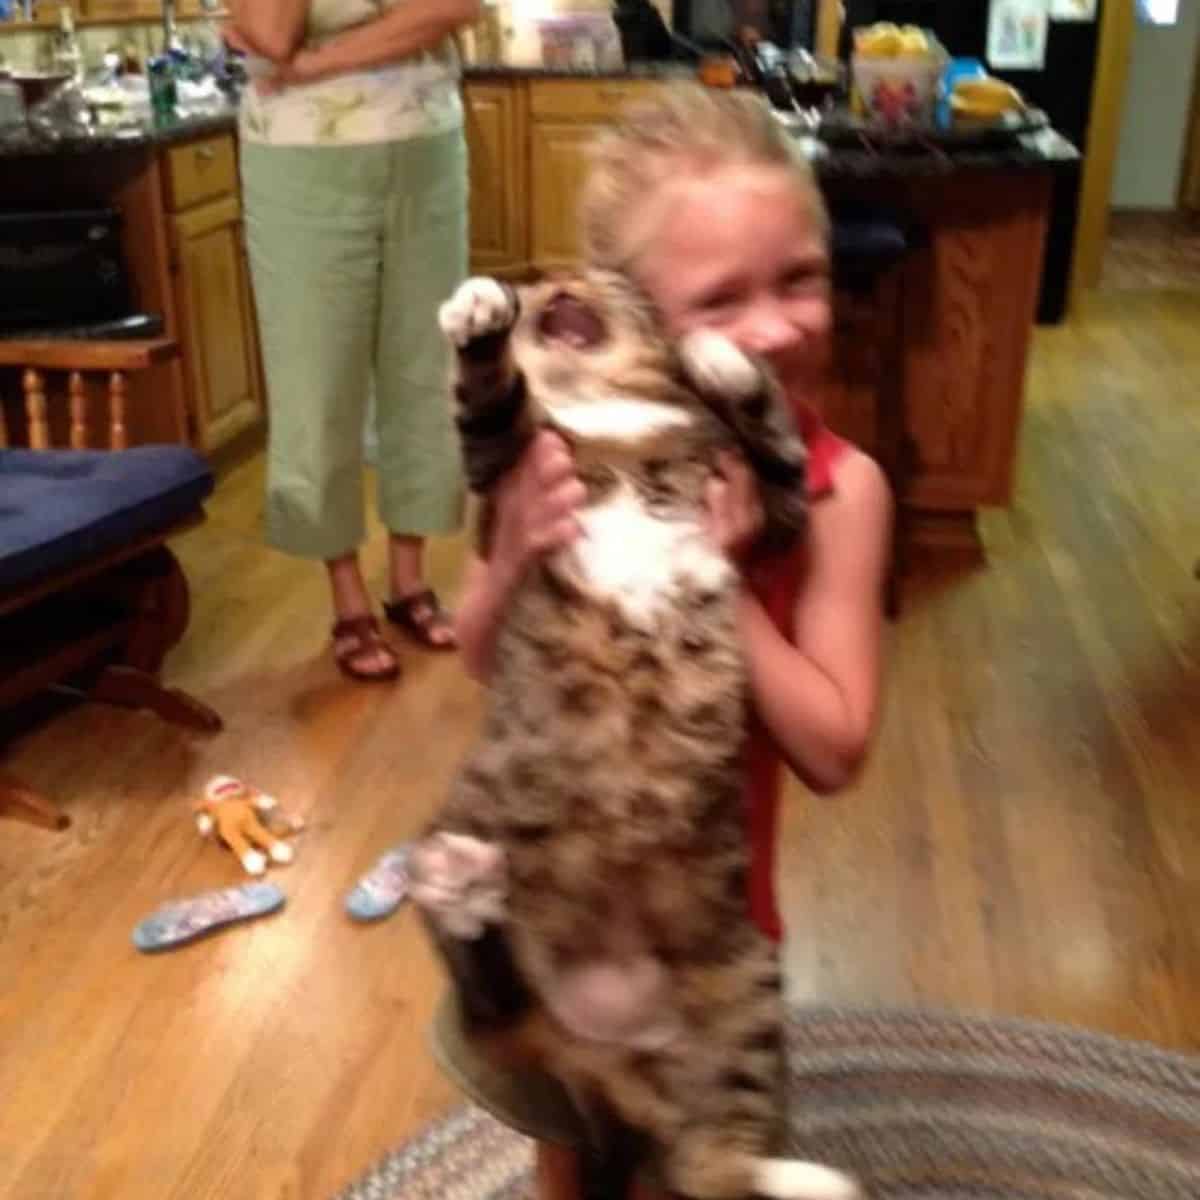 the cat meows as the girl carries her